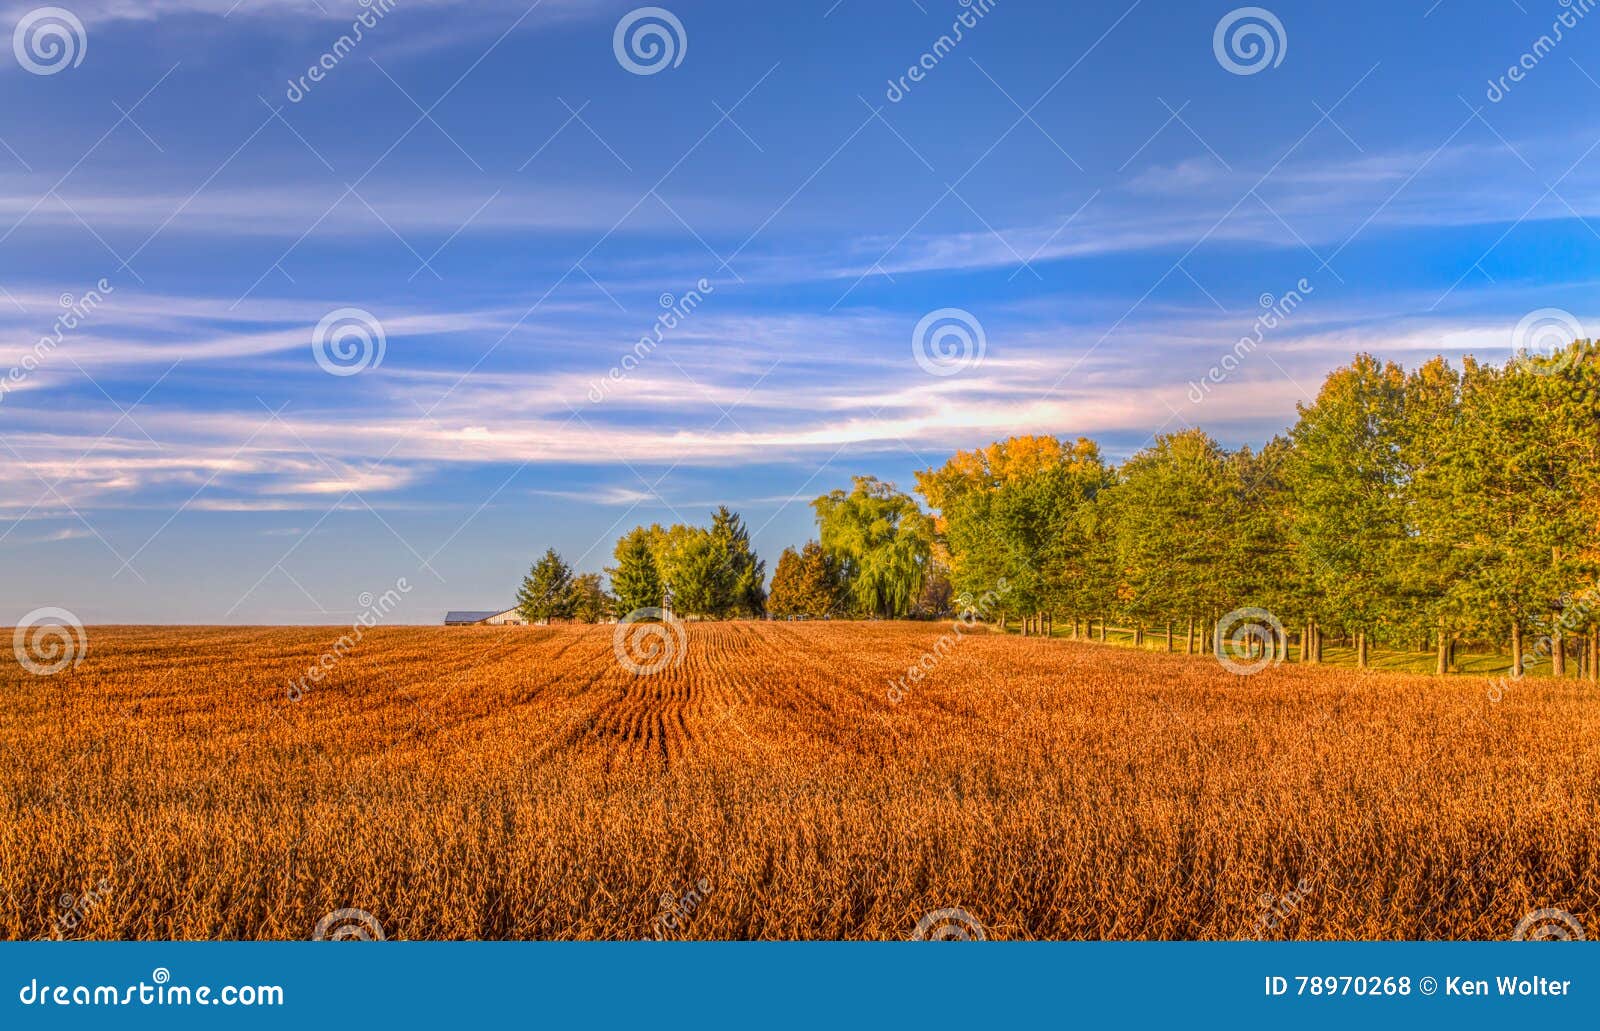 harvested wheat field in indian summer